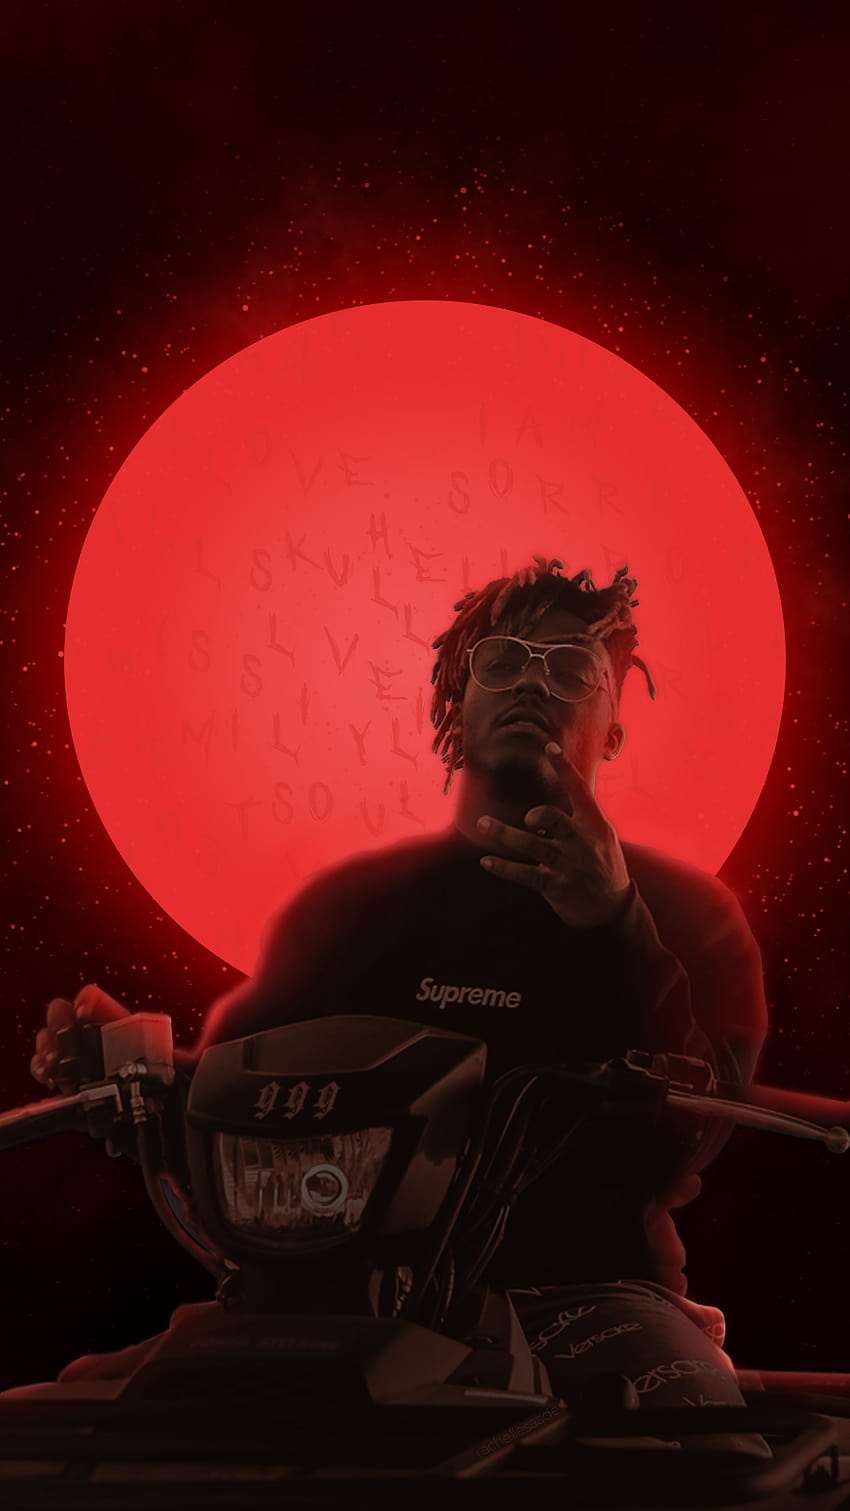 i made this juice wrld edit and thought I'd share it with you here ❤️ 999 forever, cool red moon HD phone wallpaper